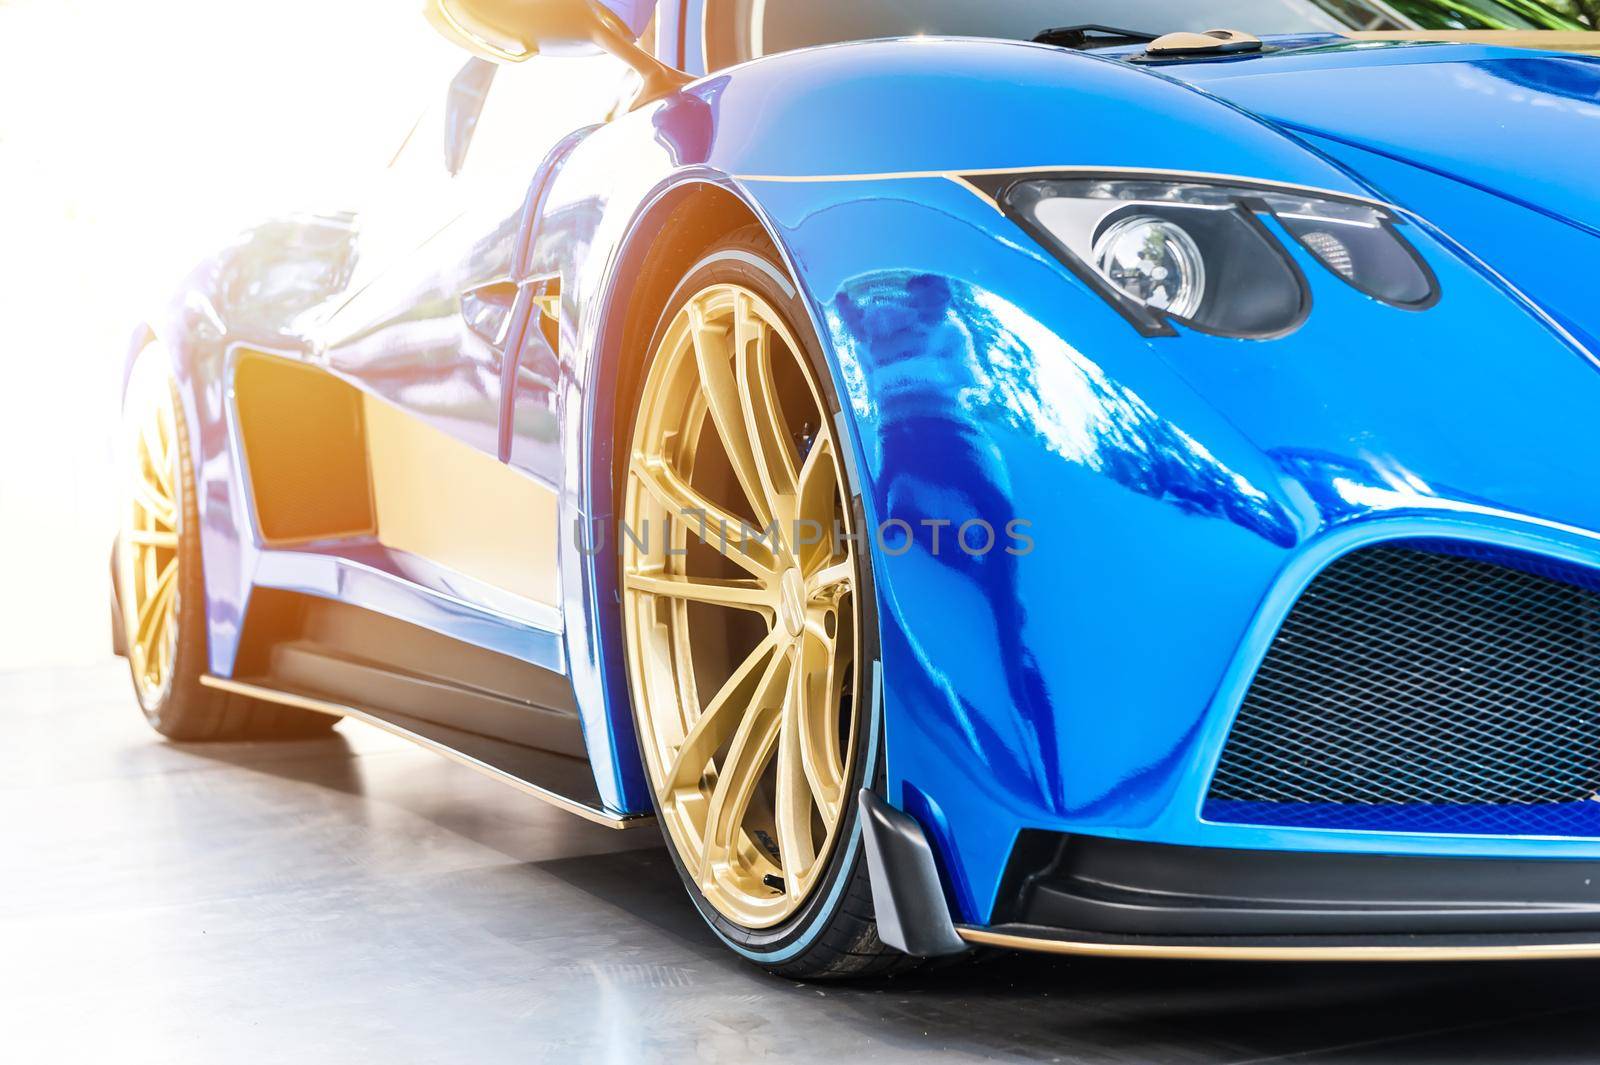 Font of a blue sport luxury car in sunset background